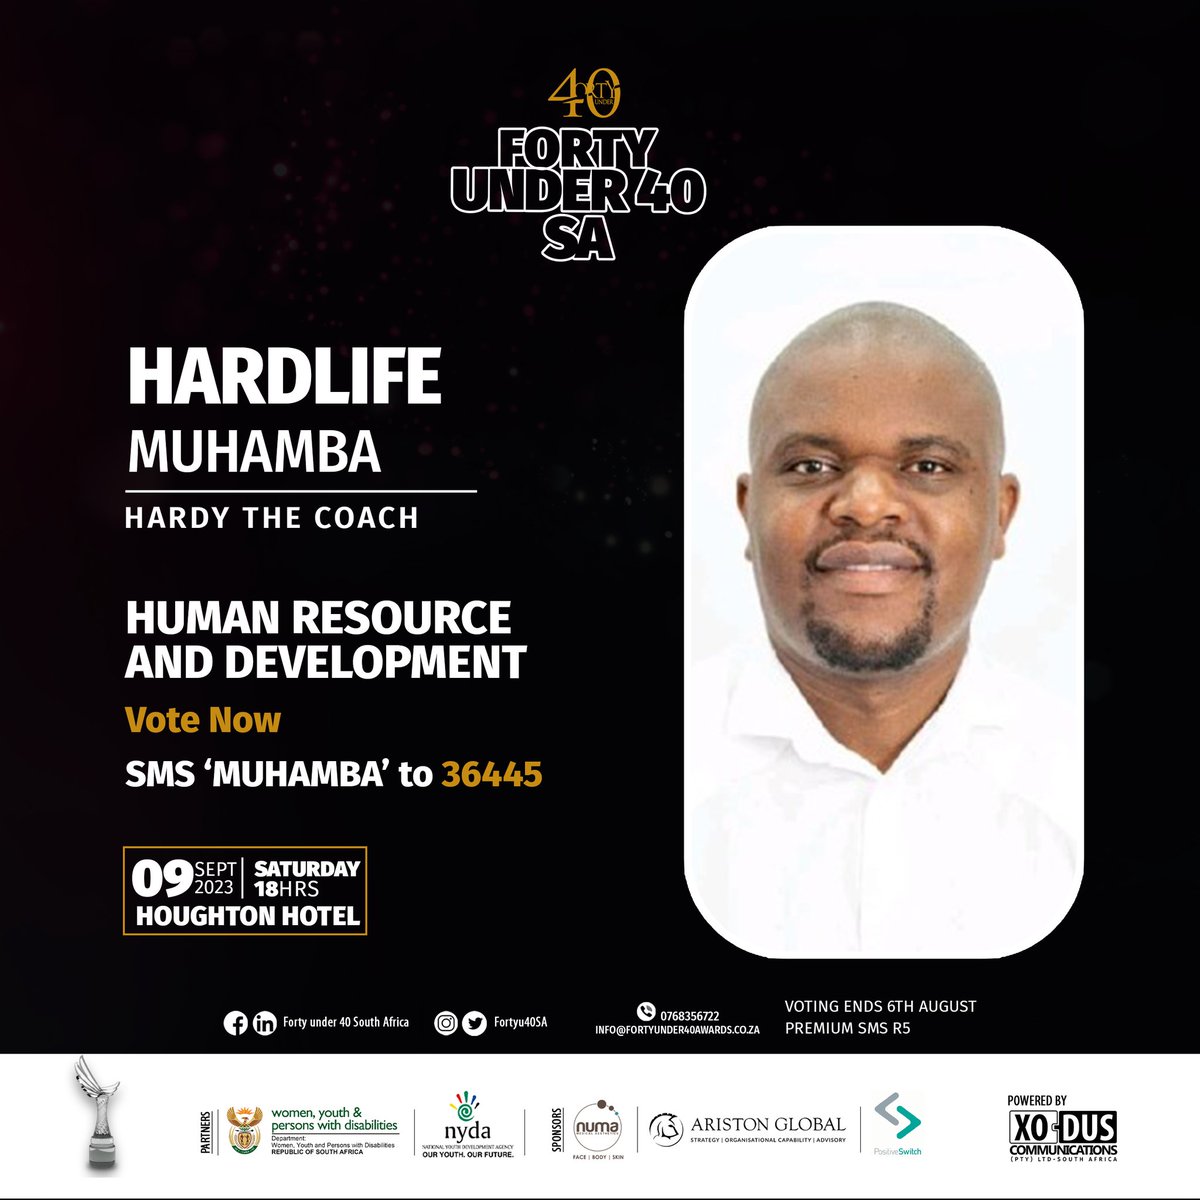 Profile of Your Nominee For Human Resource and Development   Hardlife Muhamba (Hardy The Coach) @HardlifeMuhamba Hardlife Muhamba is a holder of a Bachelor of Commerce Degree in Banking and Finance and currently studying towards a Postgraduate Diploma in Project Manager with